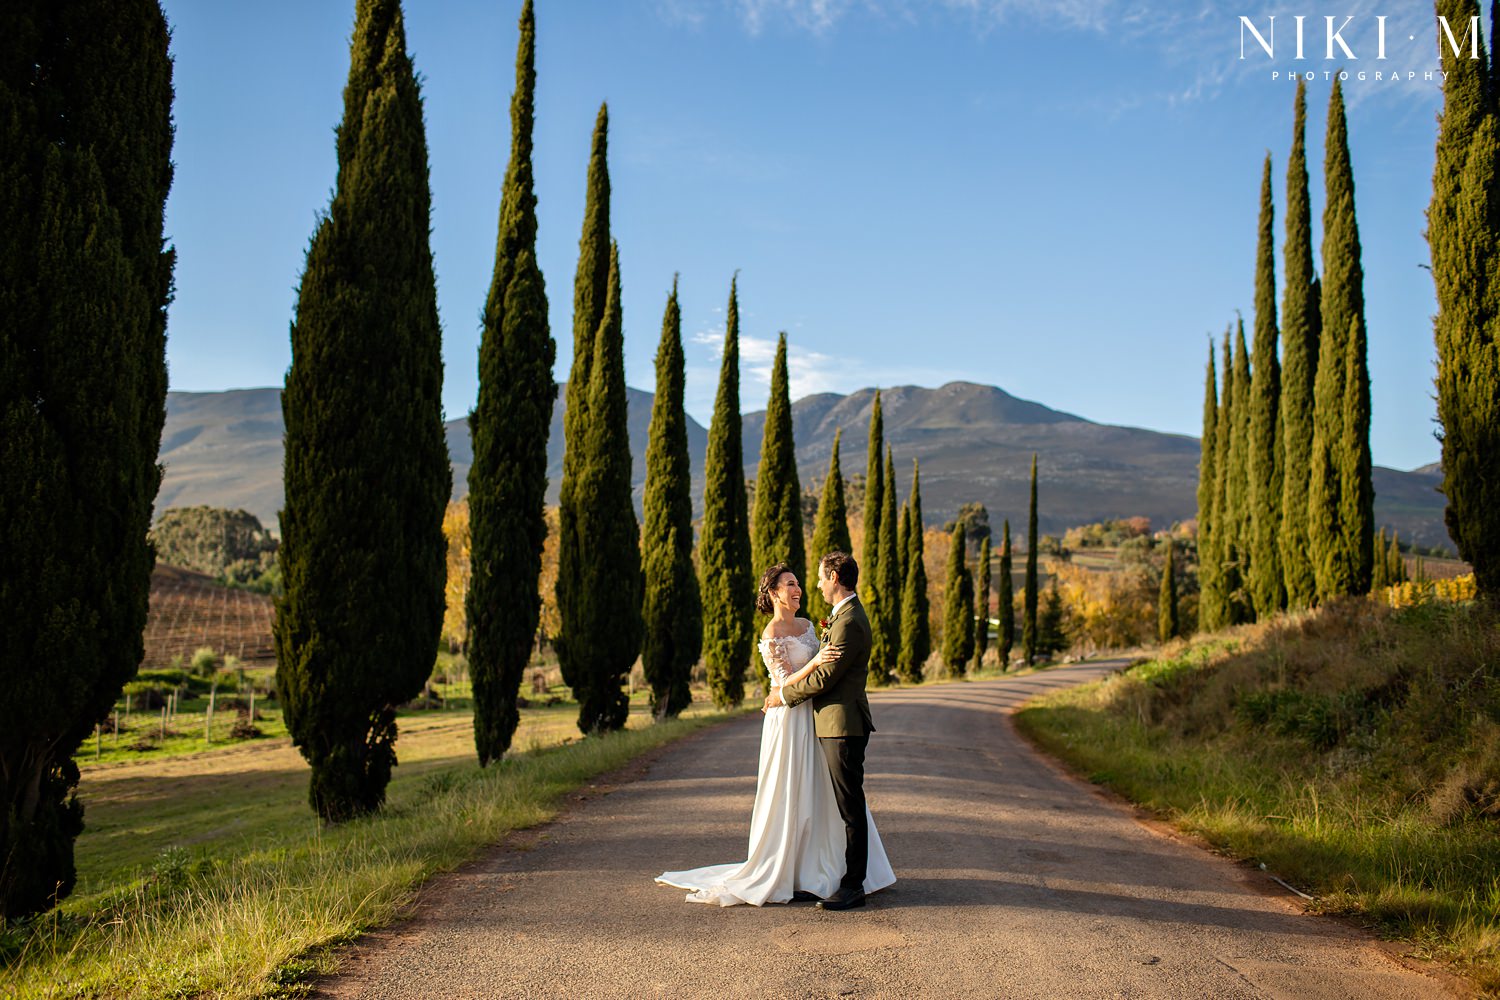 Cypress trees and the bridal couple after their ceremony at Paul Cluver Wine's chapel for their Elgin wedding. The bride wears a beautiful dress by Fender Bridal Design.